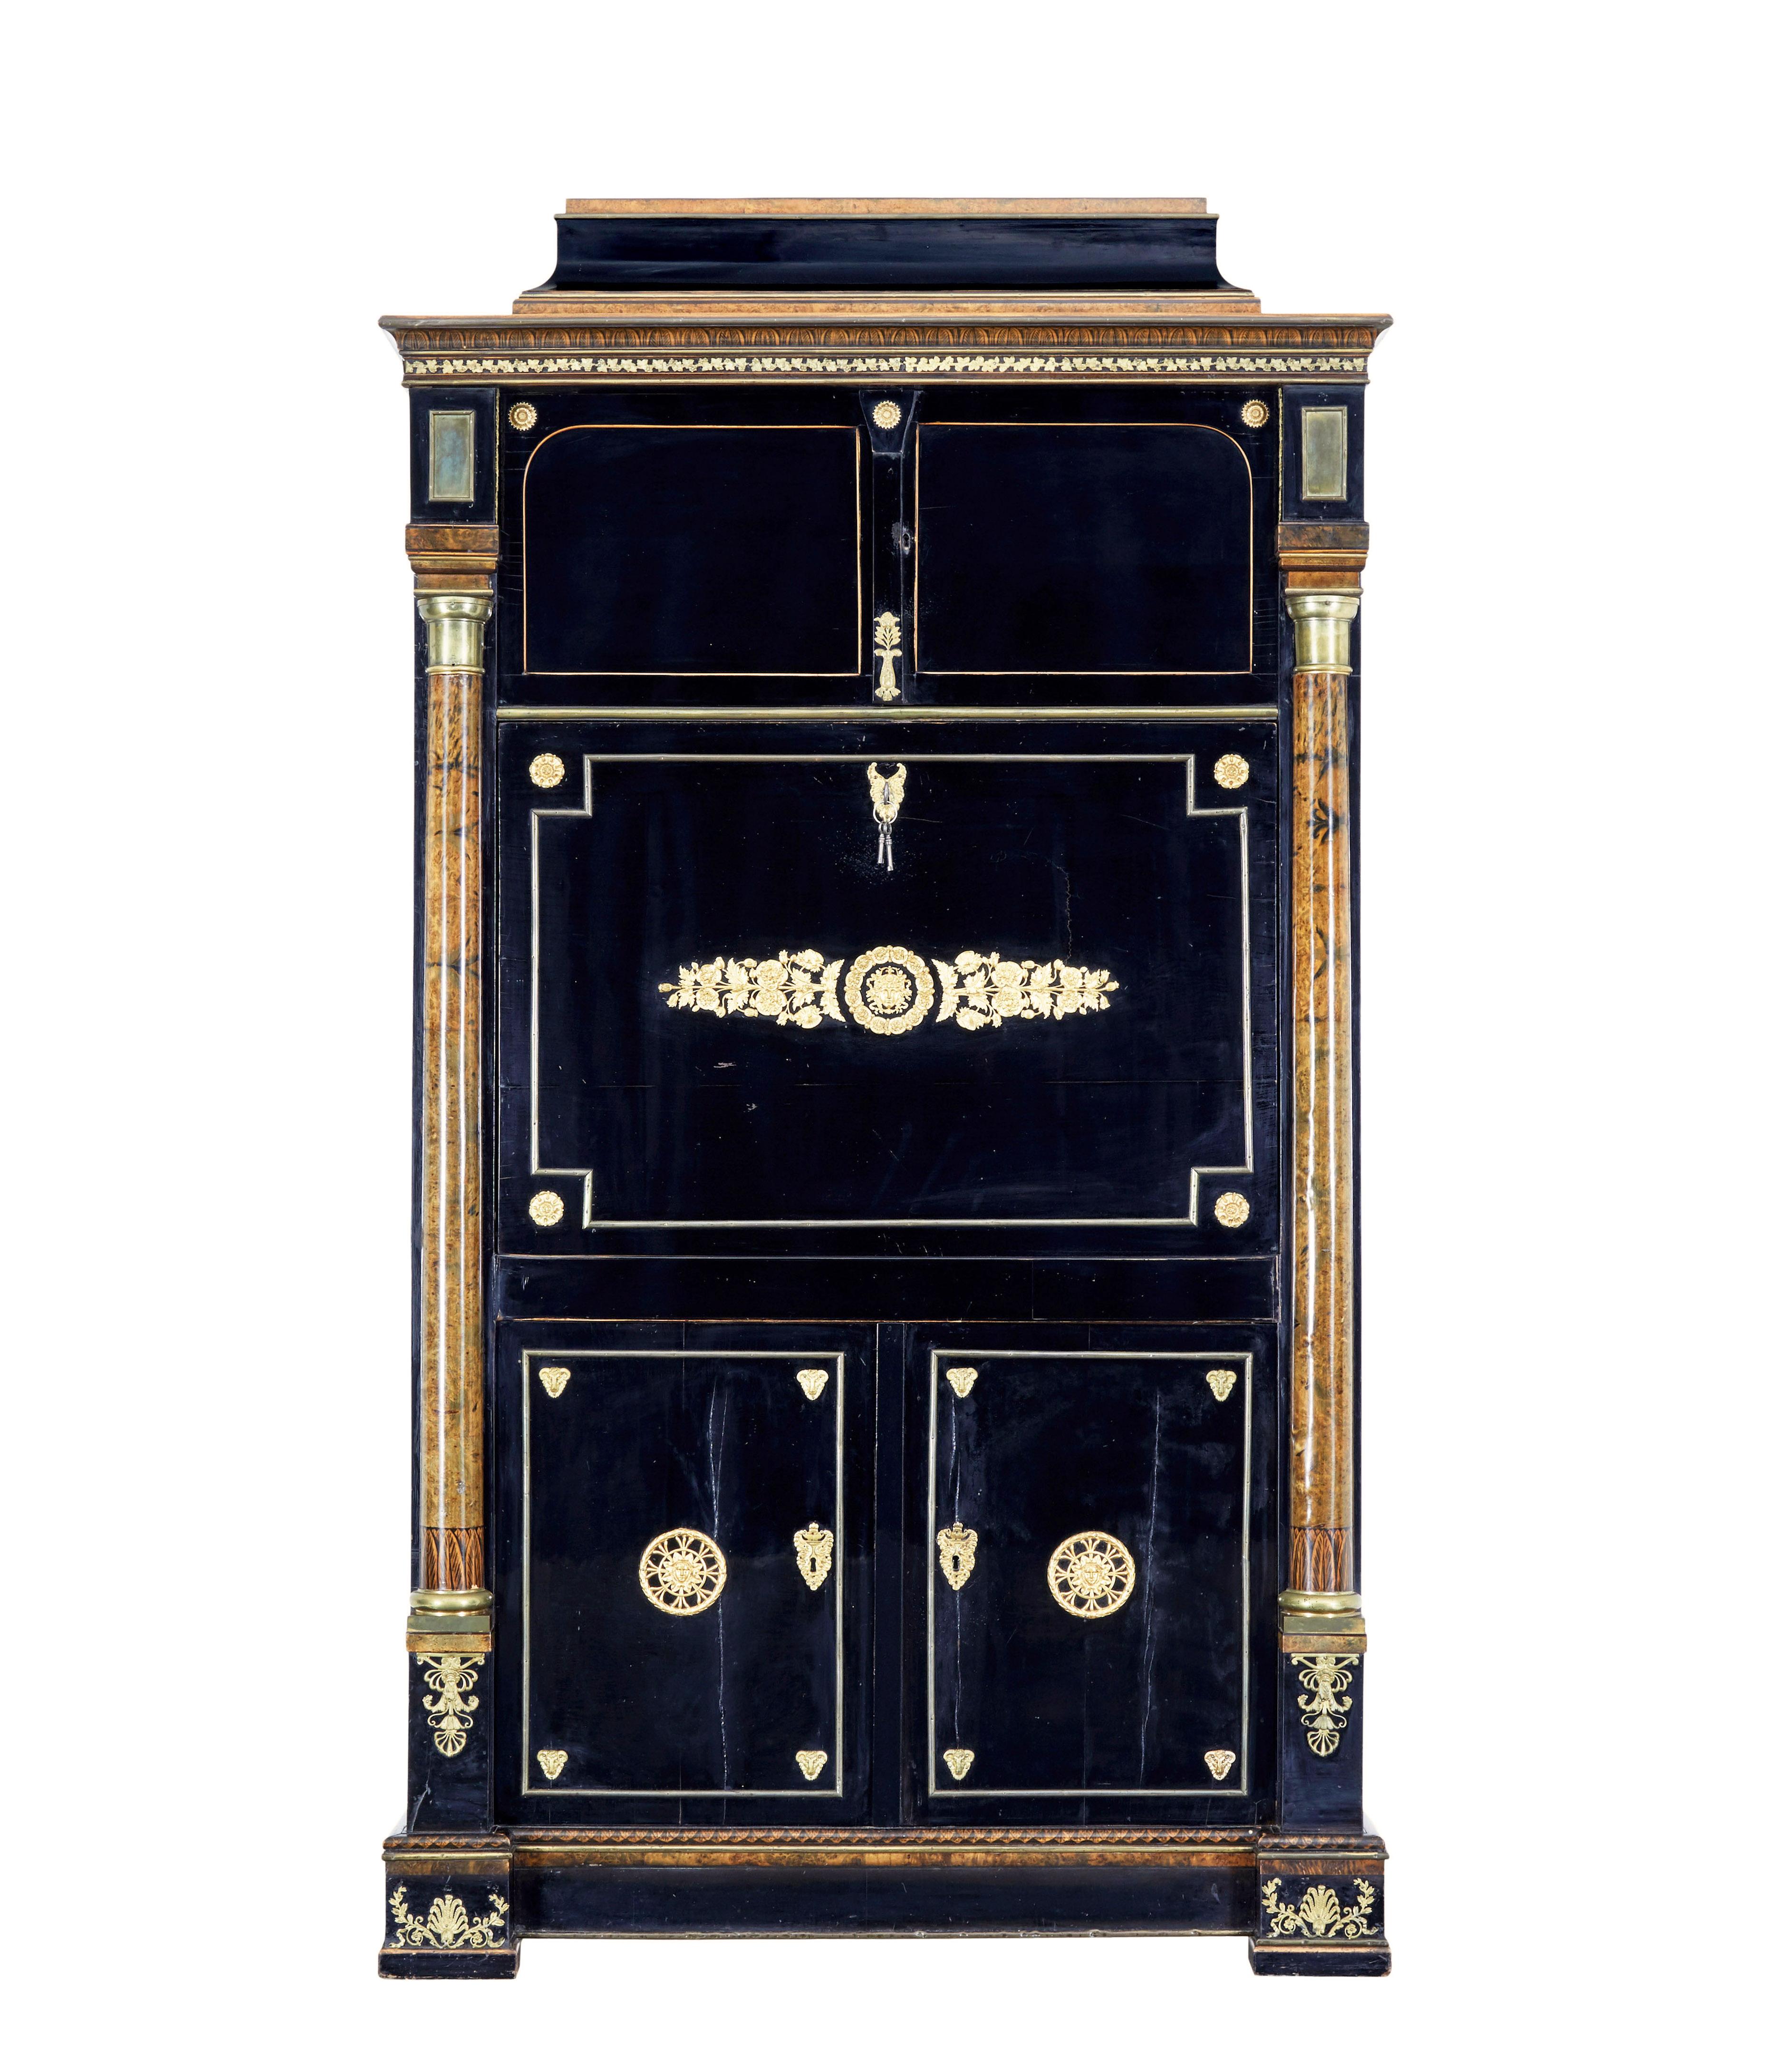 Early 19th century biedermeier ebonised birch escritoire circa 1820.

We are pleased to offer this stunning austrian biedermeier period escritoire, offered in original condition.

Made as 1 piece, beautifully ebonised, with contrasting interior and